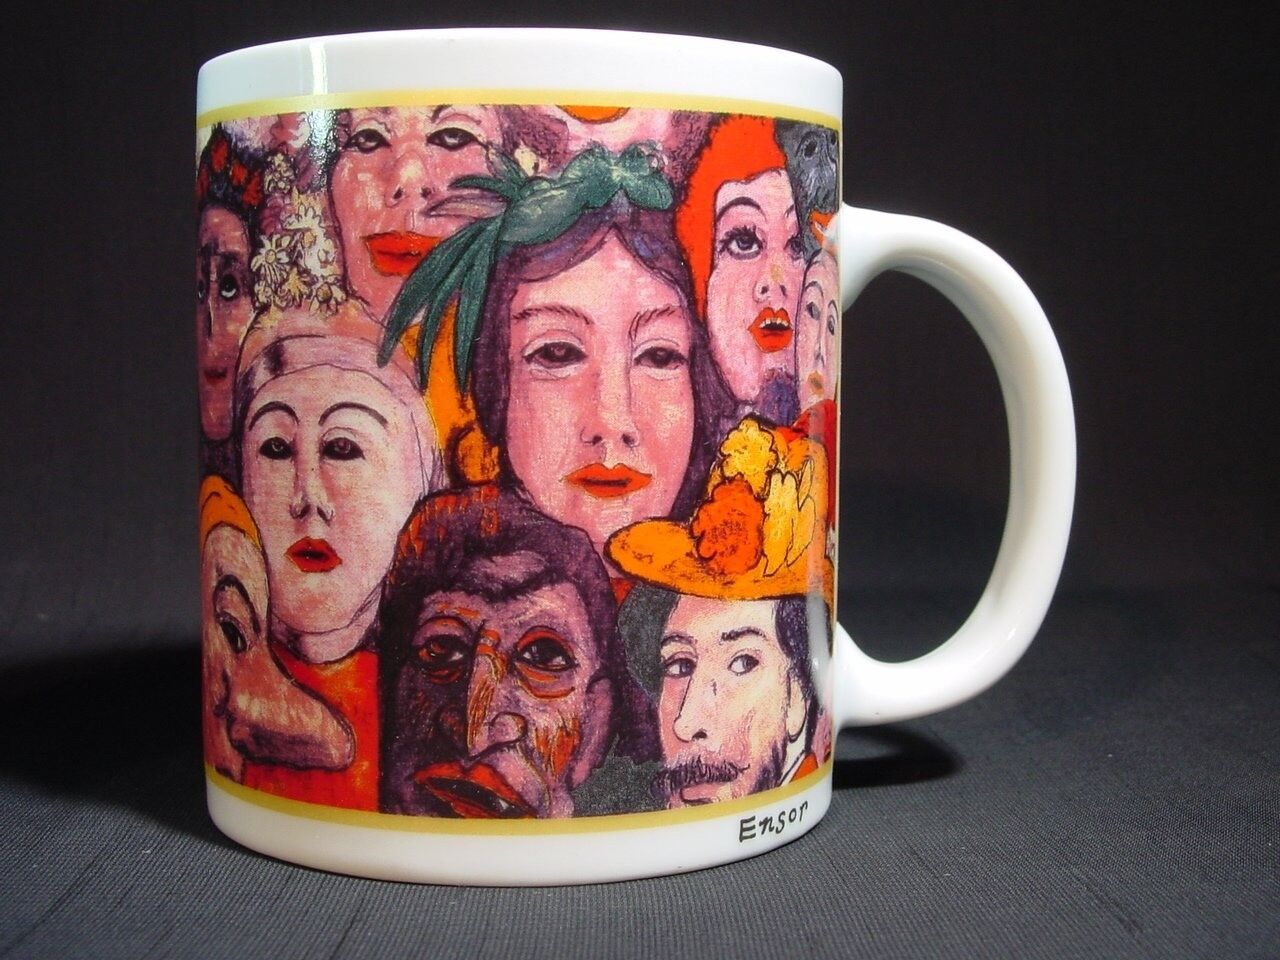 James Ensor Coffee Mug Portrait of the Artist Surrounded by Masks